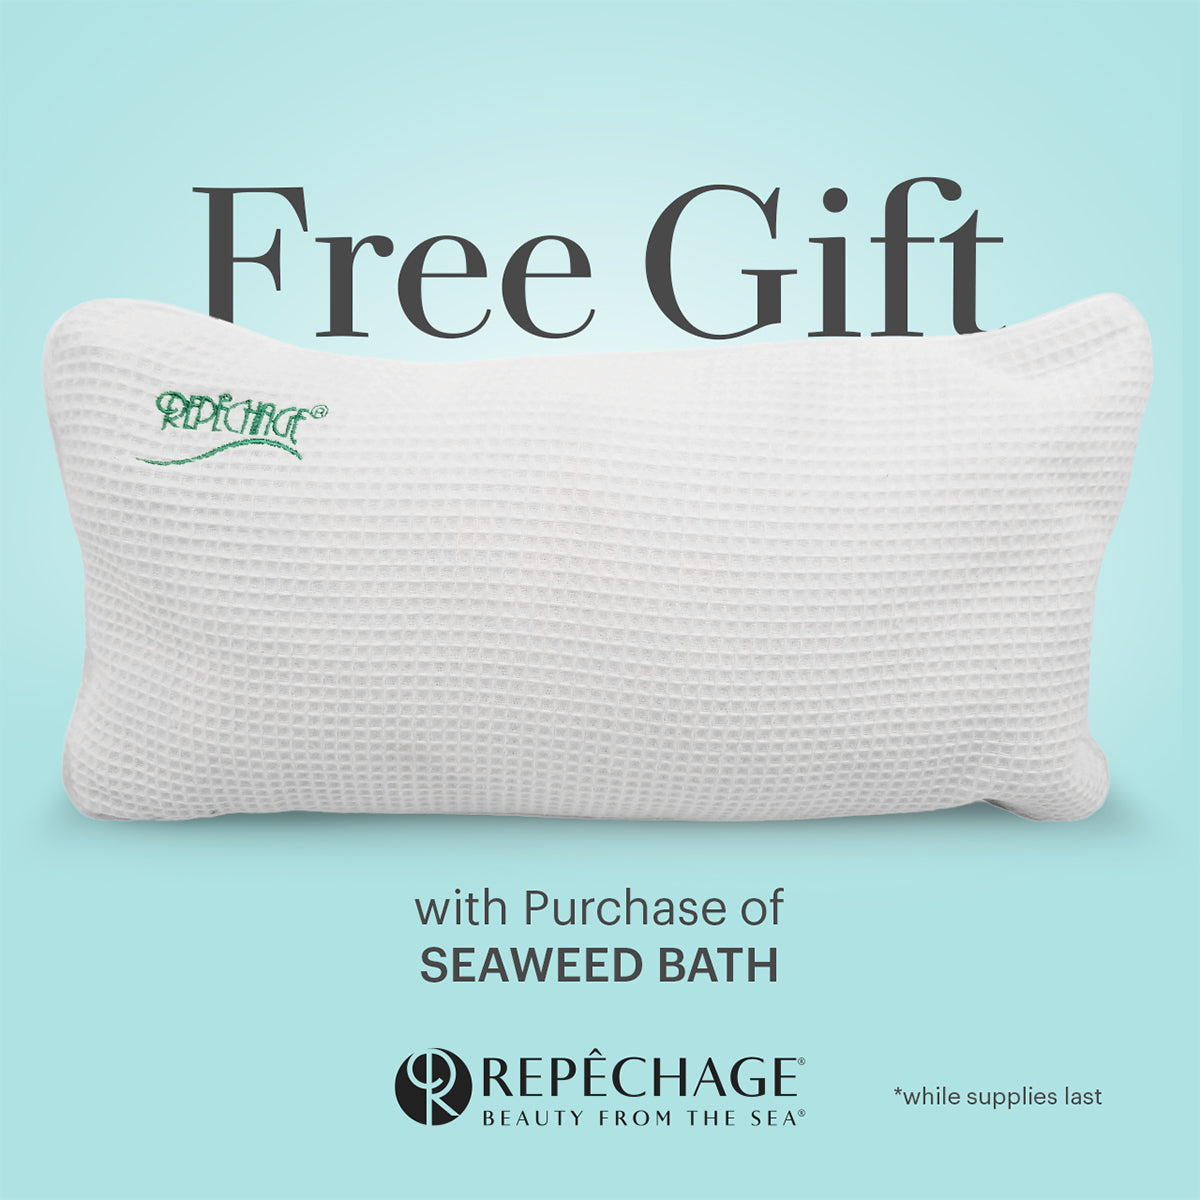 Preferred Customer Benefits - Free Gift with Purchase